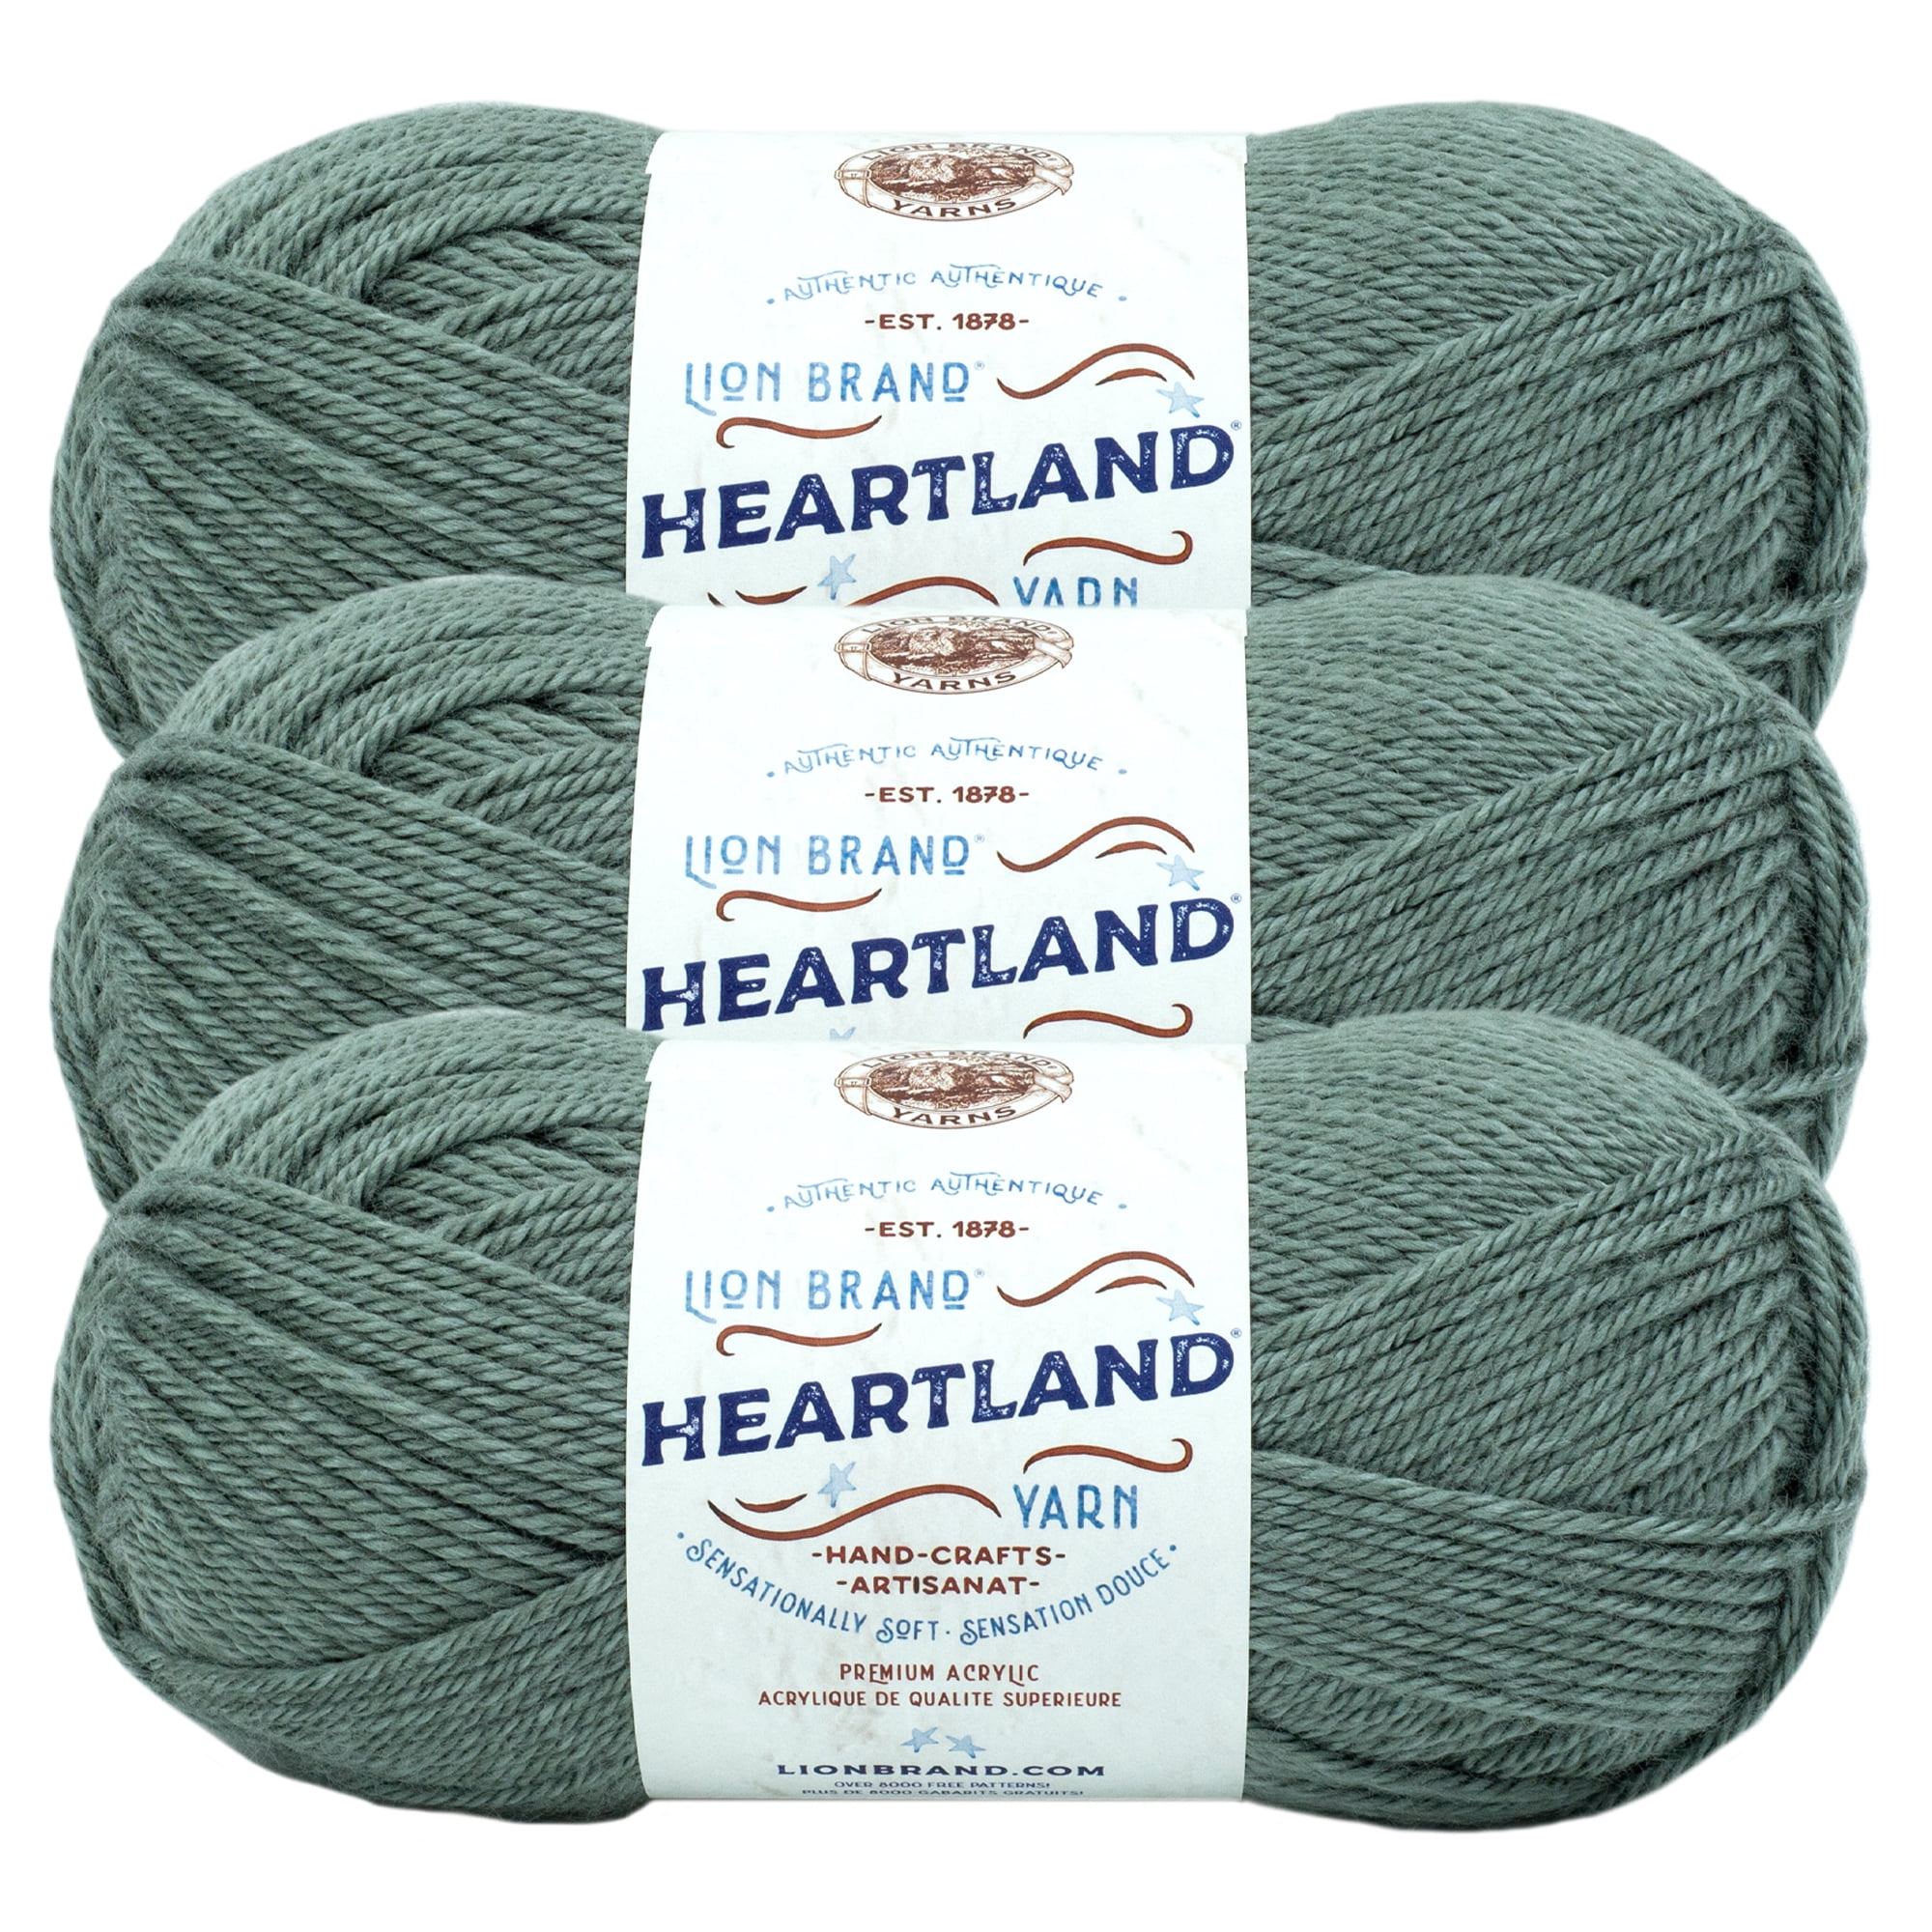 Lion Brand Yarn Landscapes 6 Pack With Pattern Cards mountain